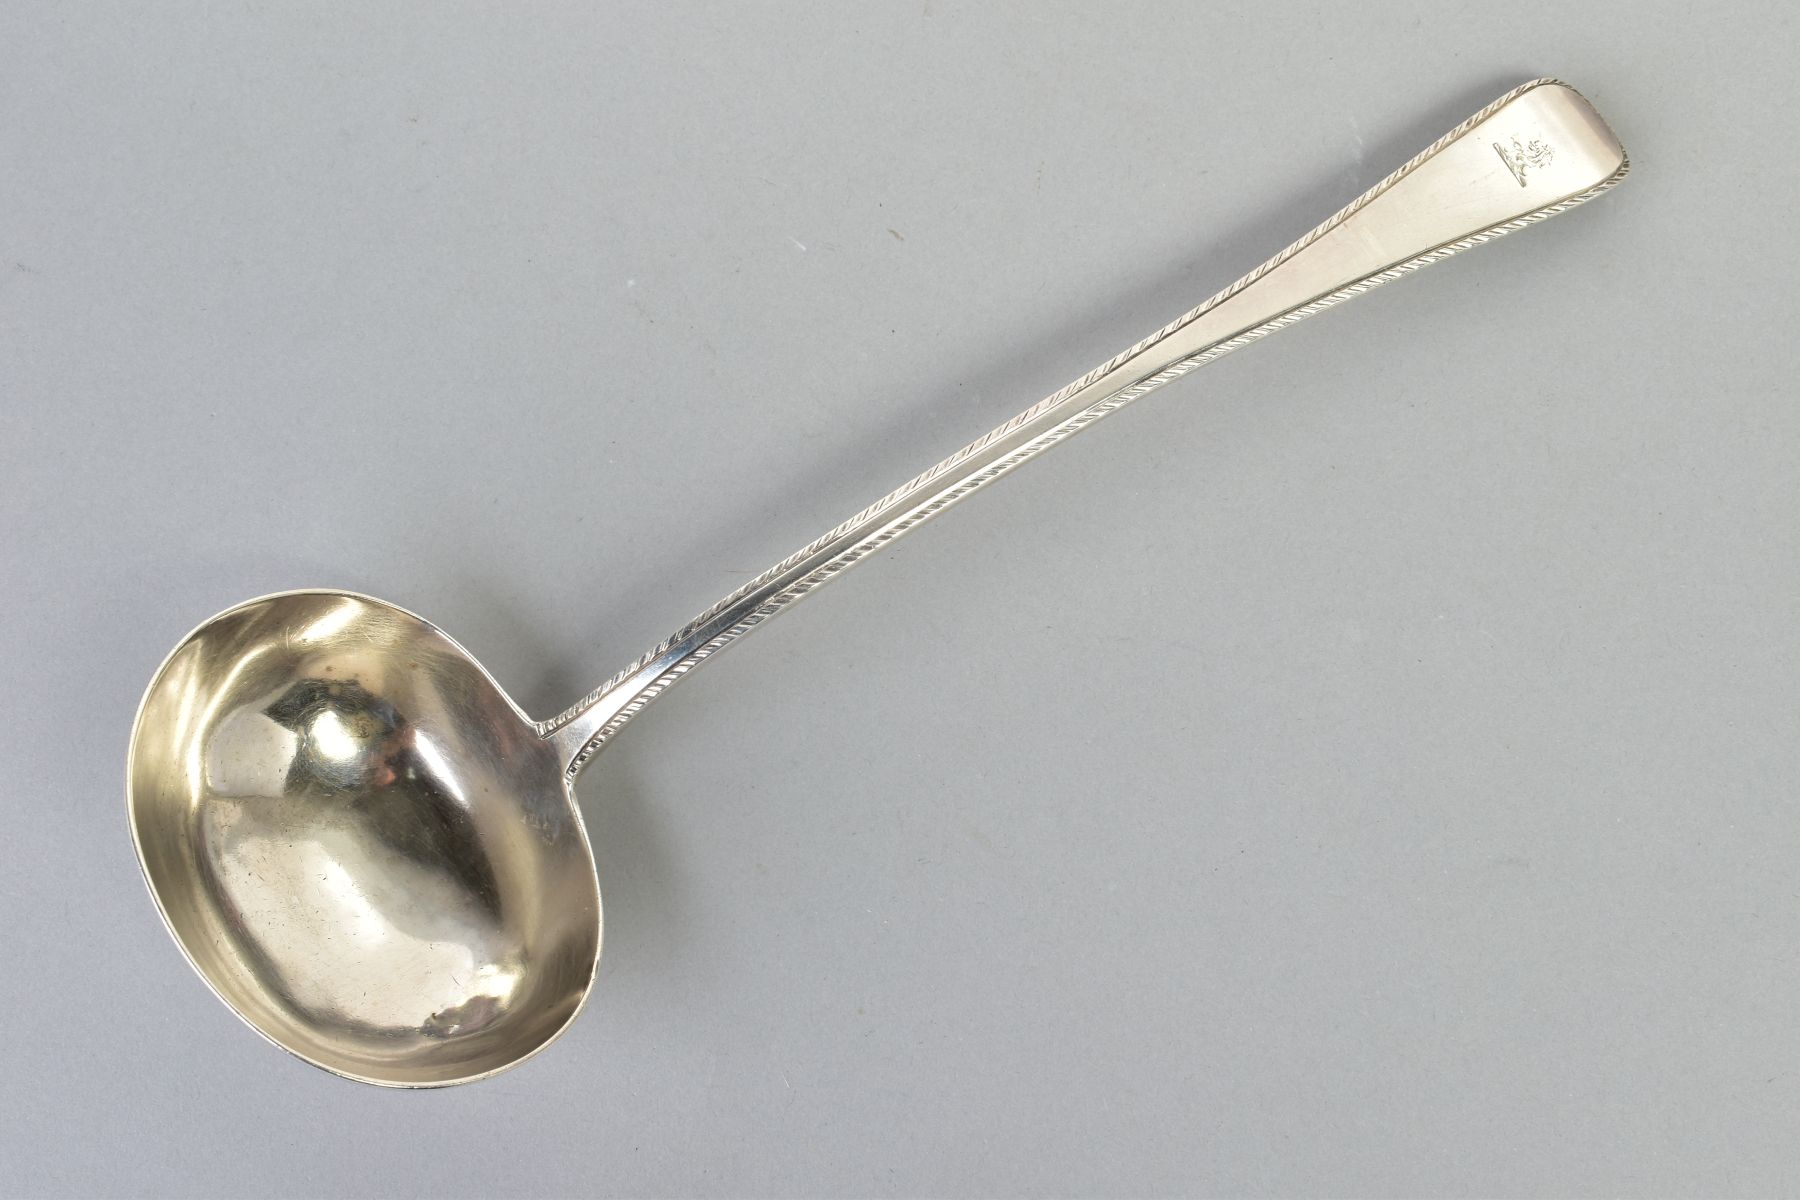 A VICTORIAN SILVER SOUP LADLE, of plain design with a feathered detail to the handle with an